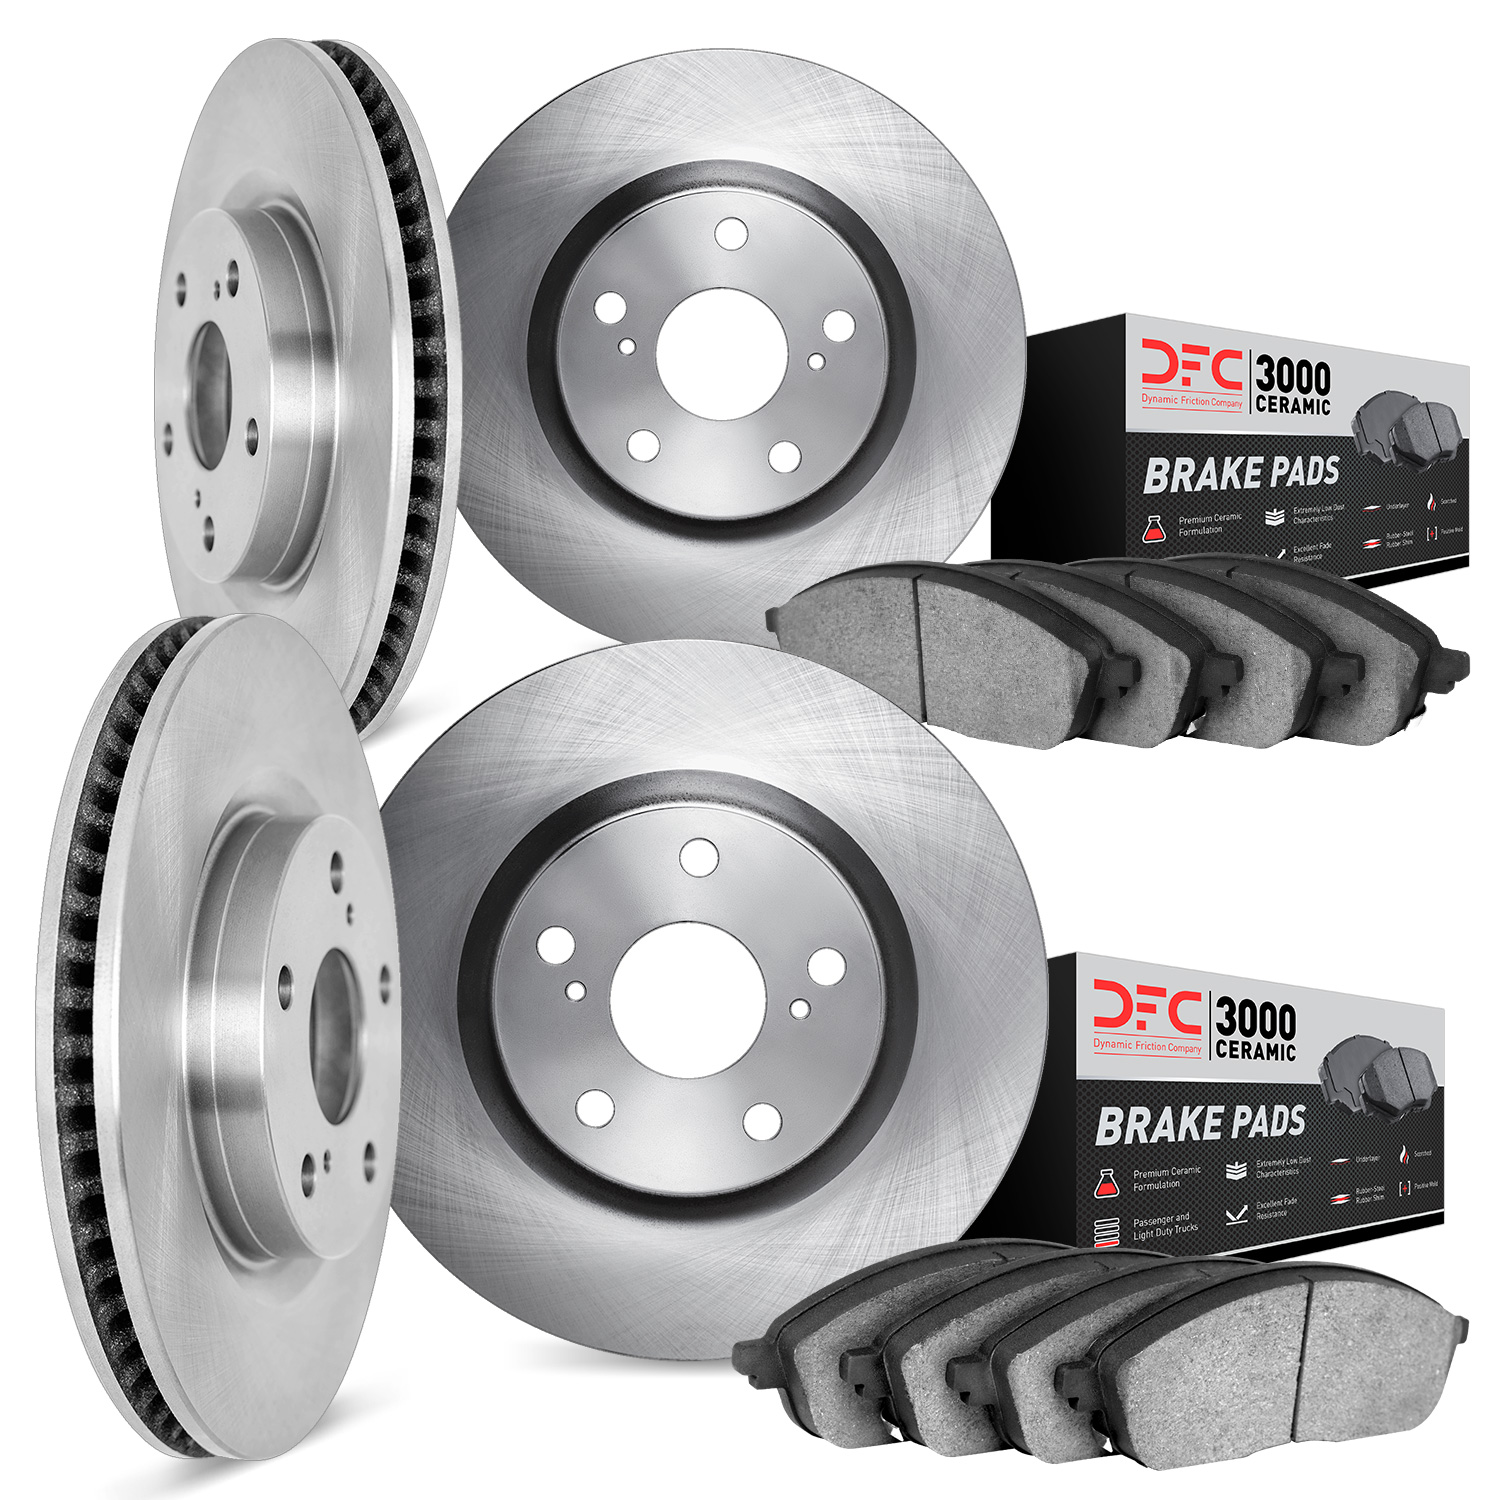 6304-31091 Brake Rotors with 3000-Series Ceramic Brake Pads Kit, 2011-2018 BMW, Position: Front and Rear